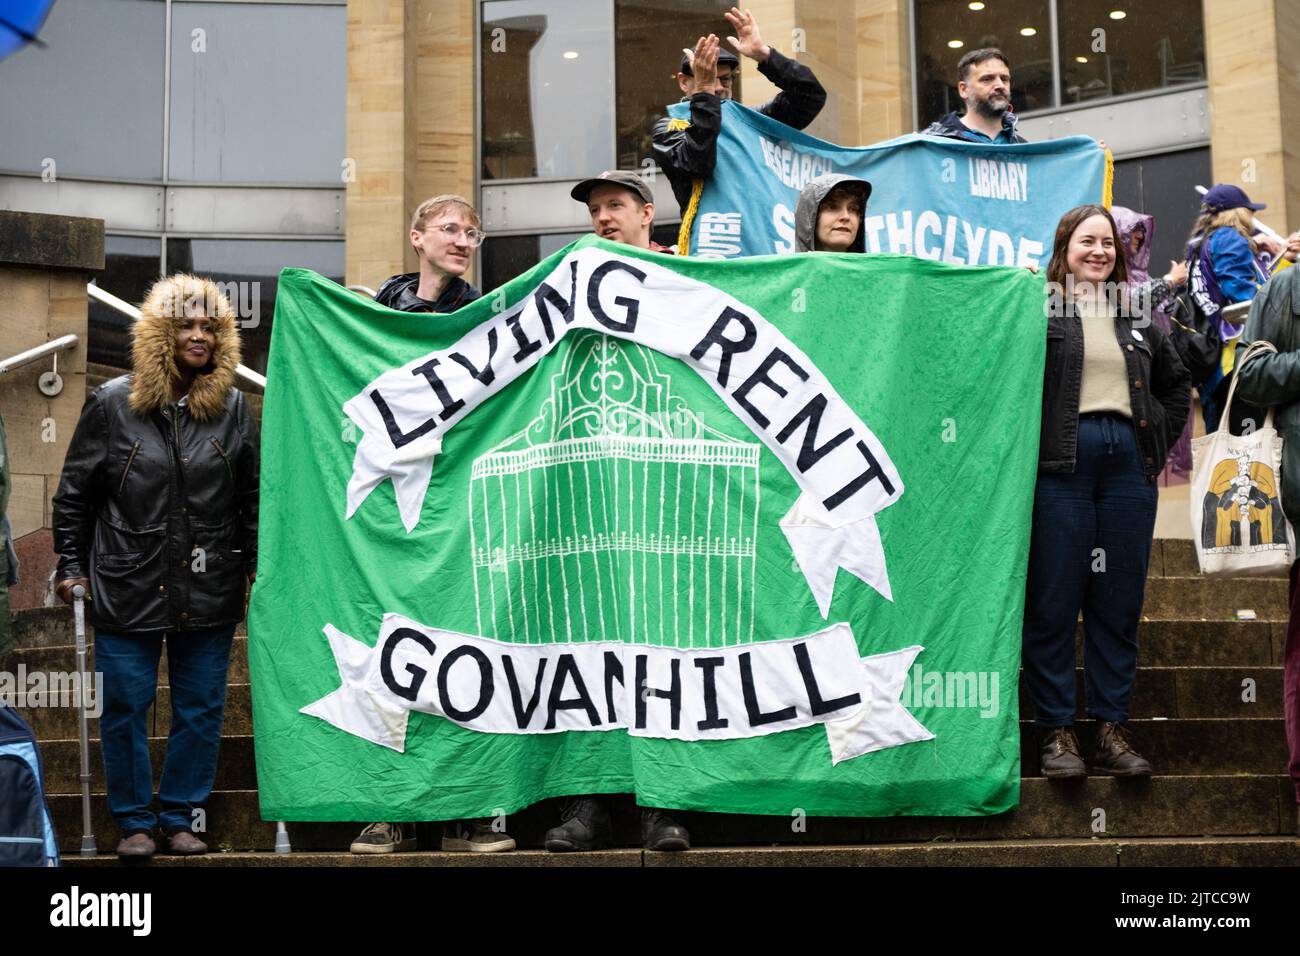 Living Rent (tenants union in Scotland) Govanhill banner held by demonstrators at joint union strike rally in Glasgow on 26 August 2022, Scotland, UK Stock Photo